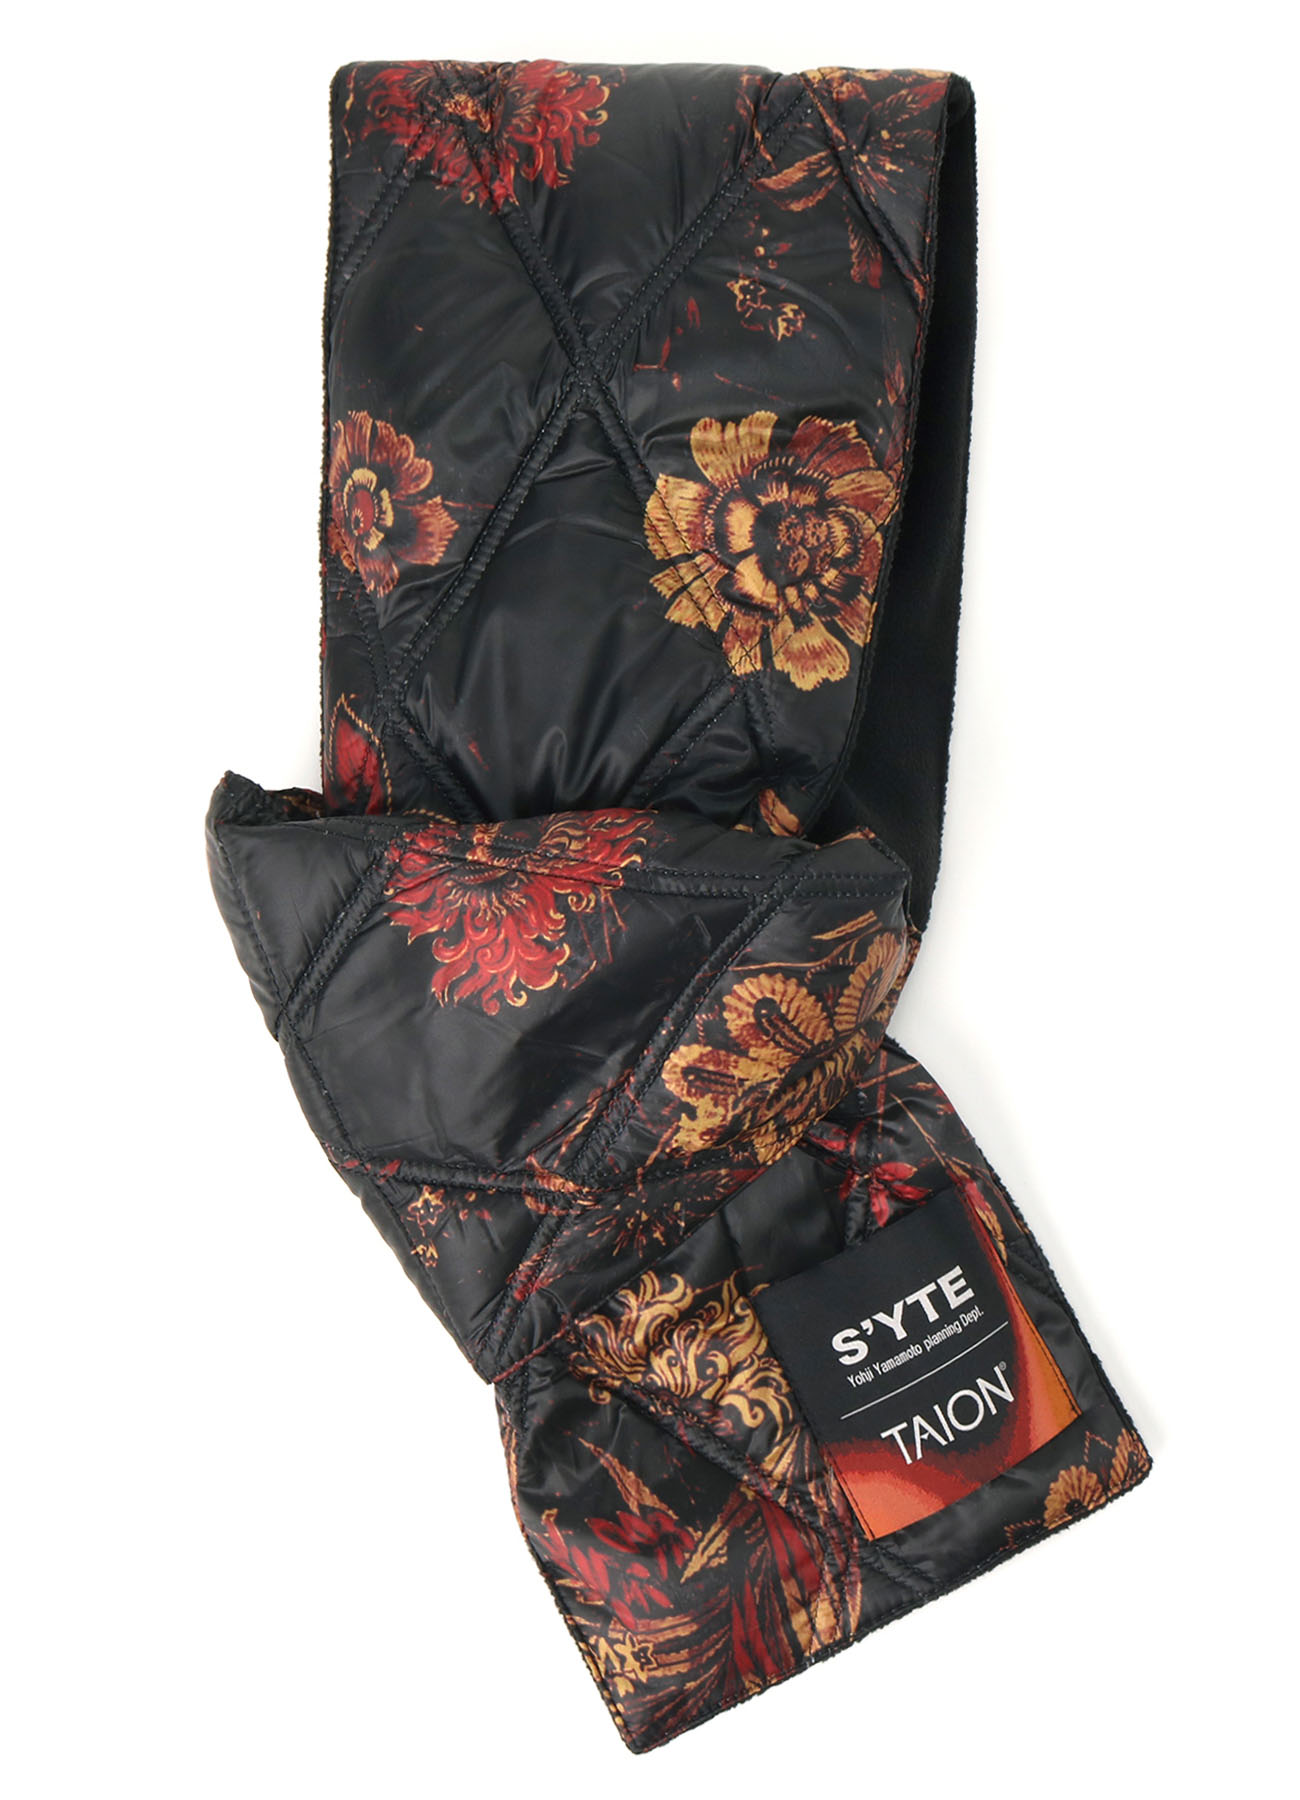 【S'YTE x TAION】Collaboration Collection FLORAL PATTERN QUILTED DOWN SCARF